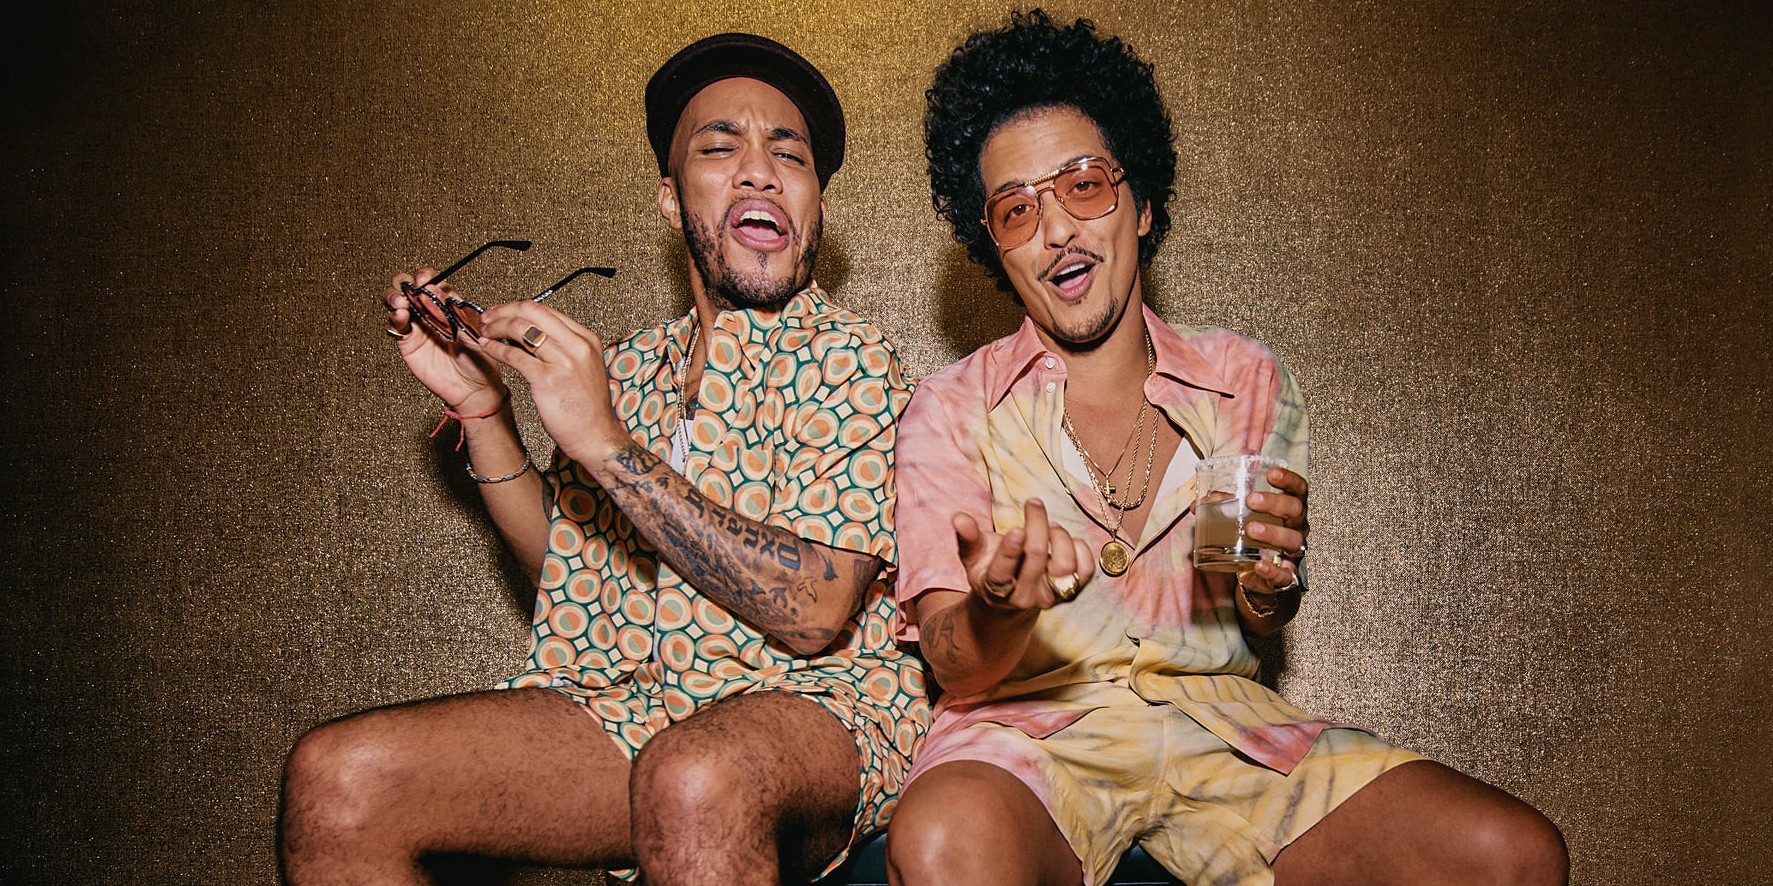 Bruno Mars and Anderson .Paak's Silk Sonic to make live debut at the 63rd GRAMMY Awards 